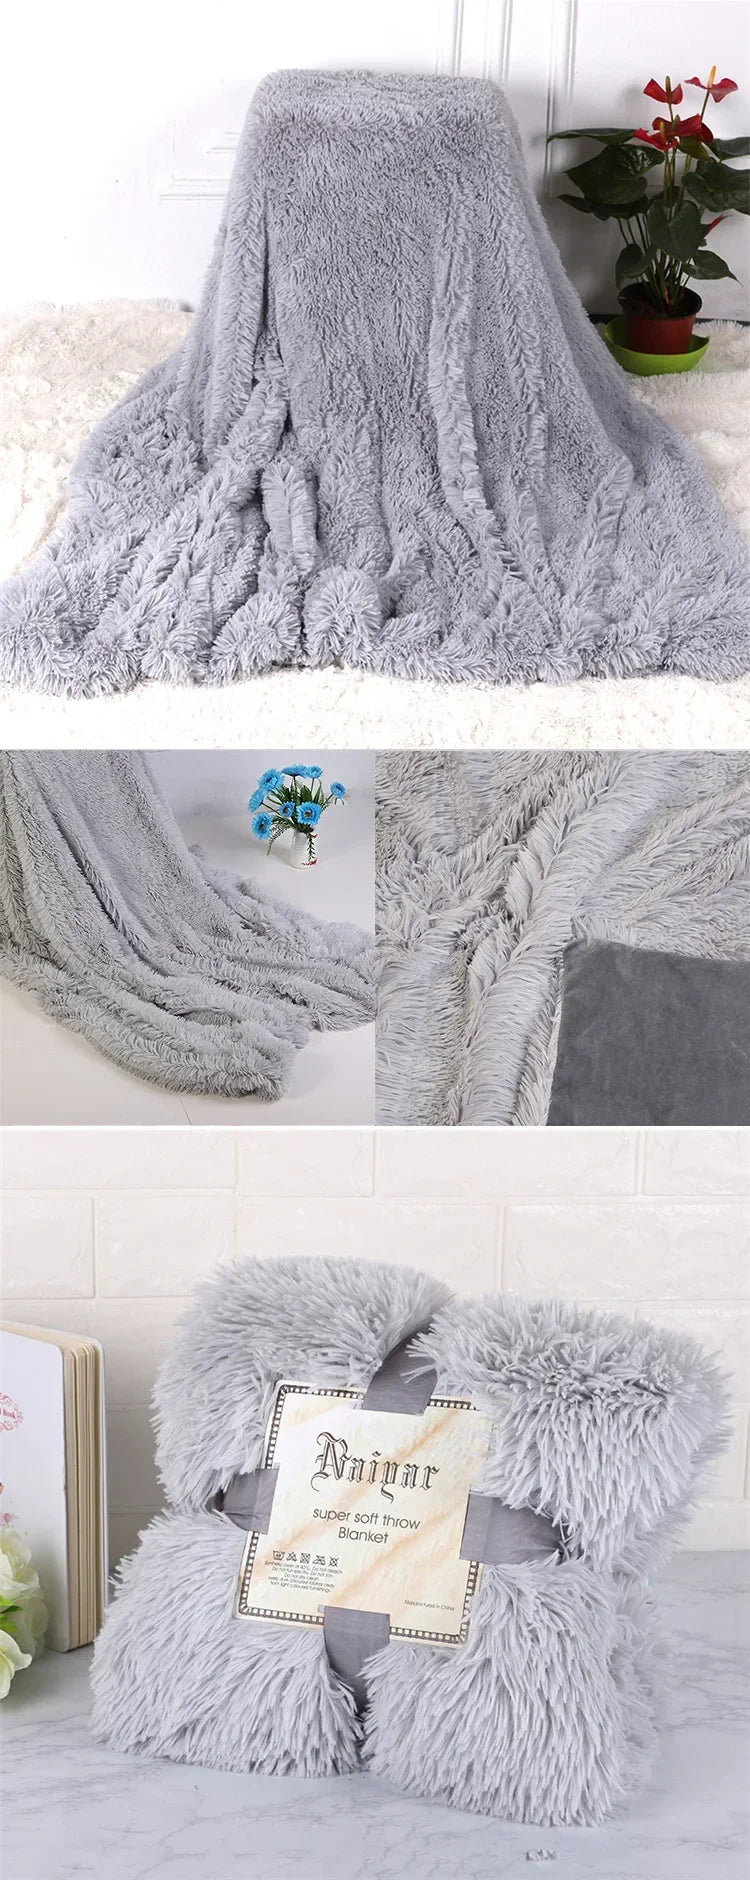 FuzzyHaven Luxe Fur Blanket | Ultra-Soft and Warm Faux Fur Throw | Elegant and Cozy for Bed or Sofa | Available in Multiple Sizes and Pillow Covers | Beige White | Machine Washable